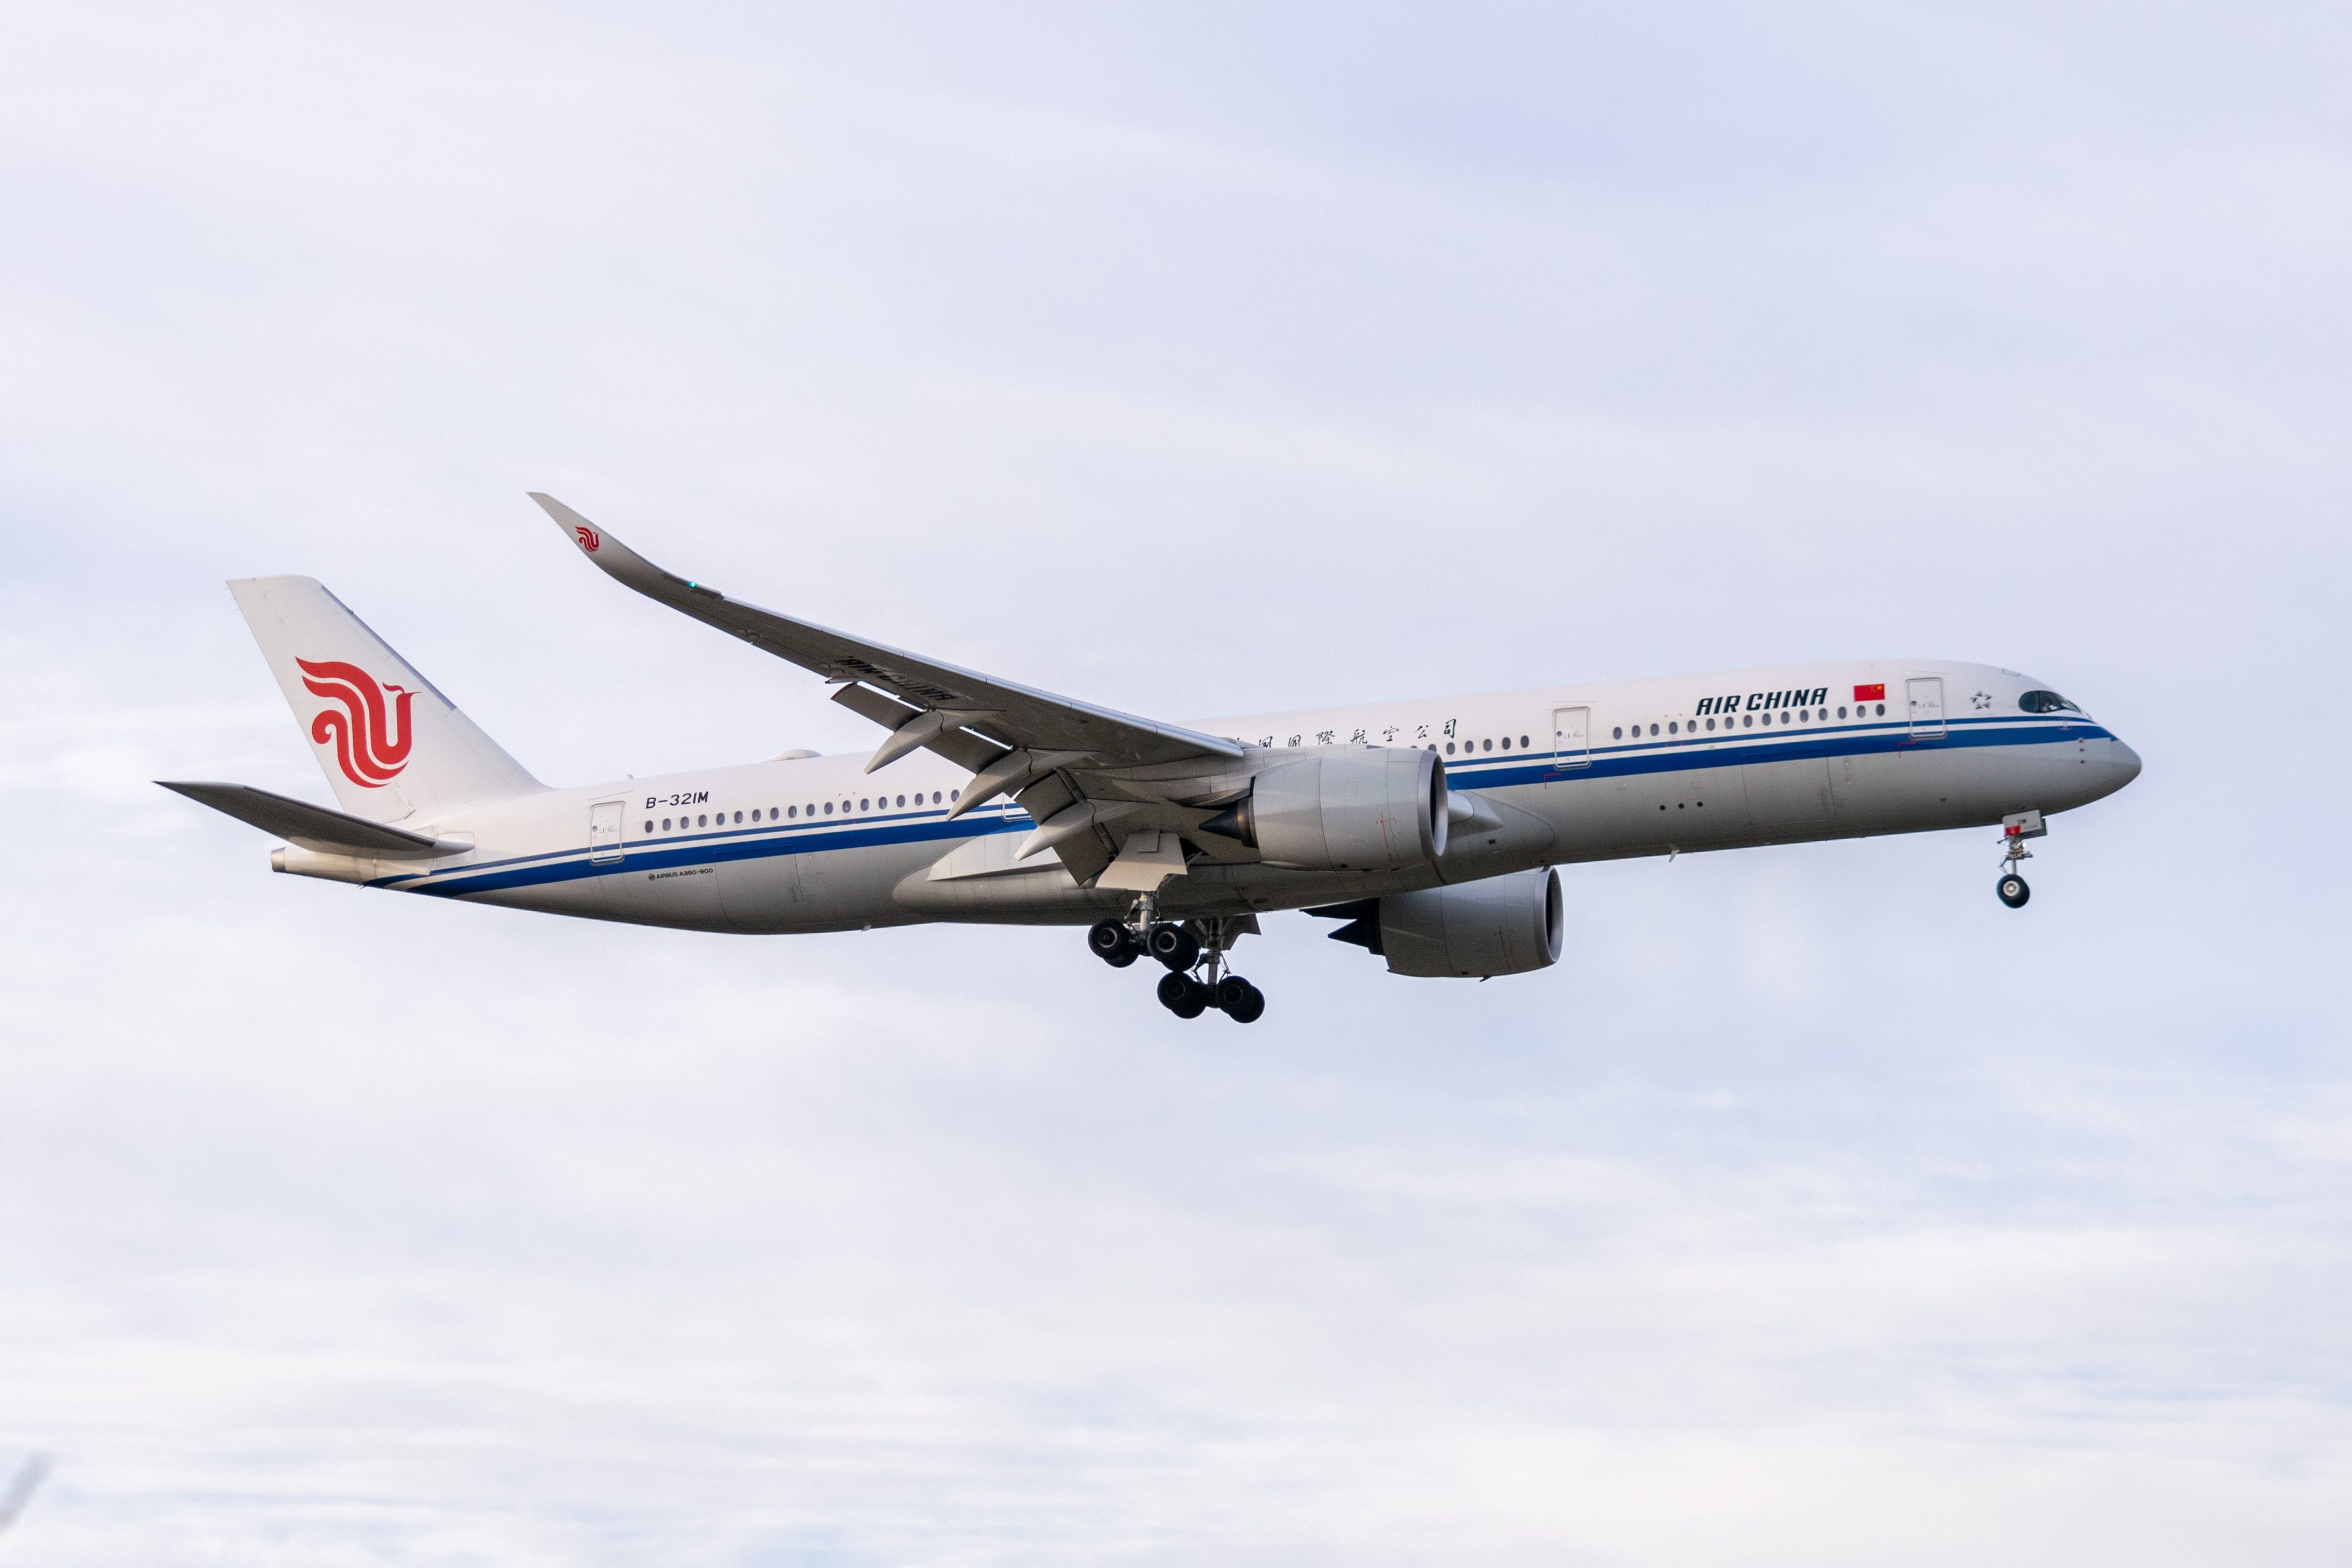 Air China A350 on approach.